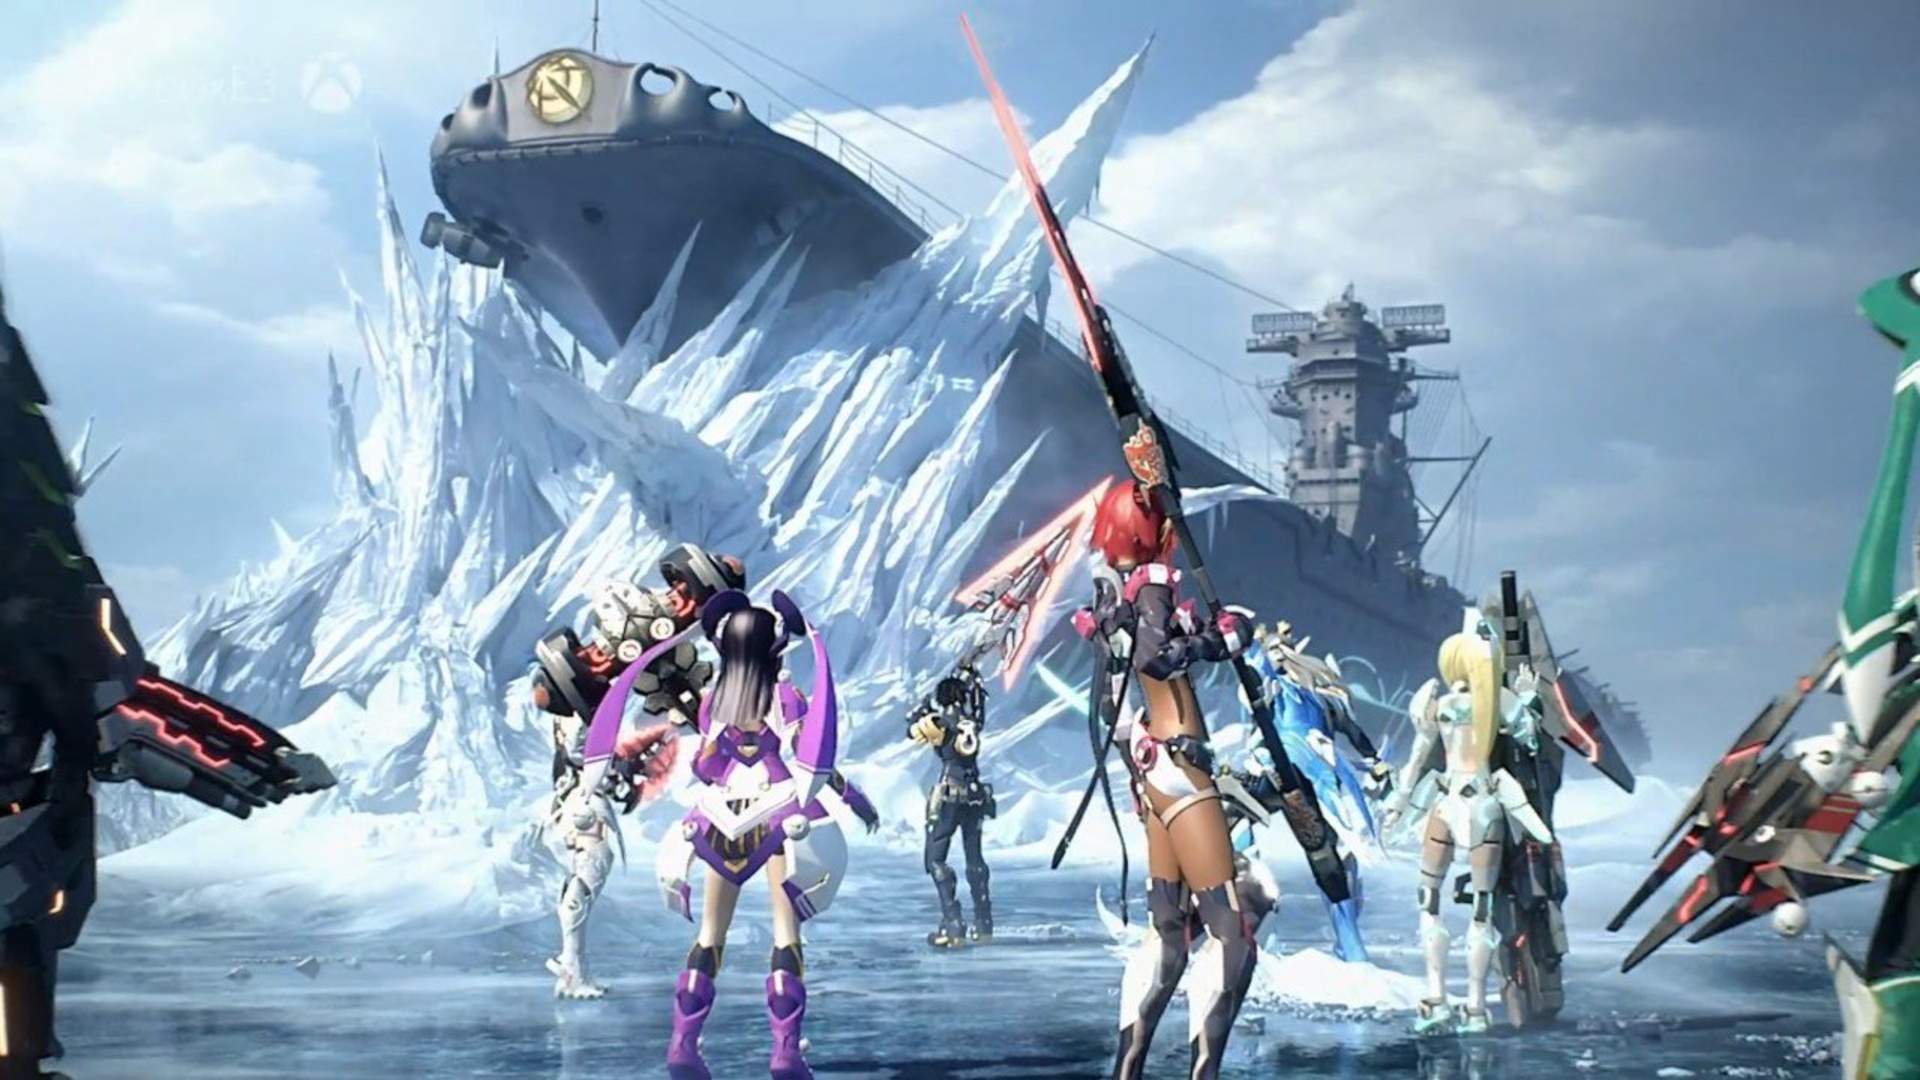 Free Phantasy Star Online 2 Content Coming This August